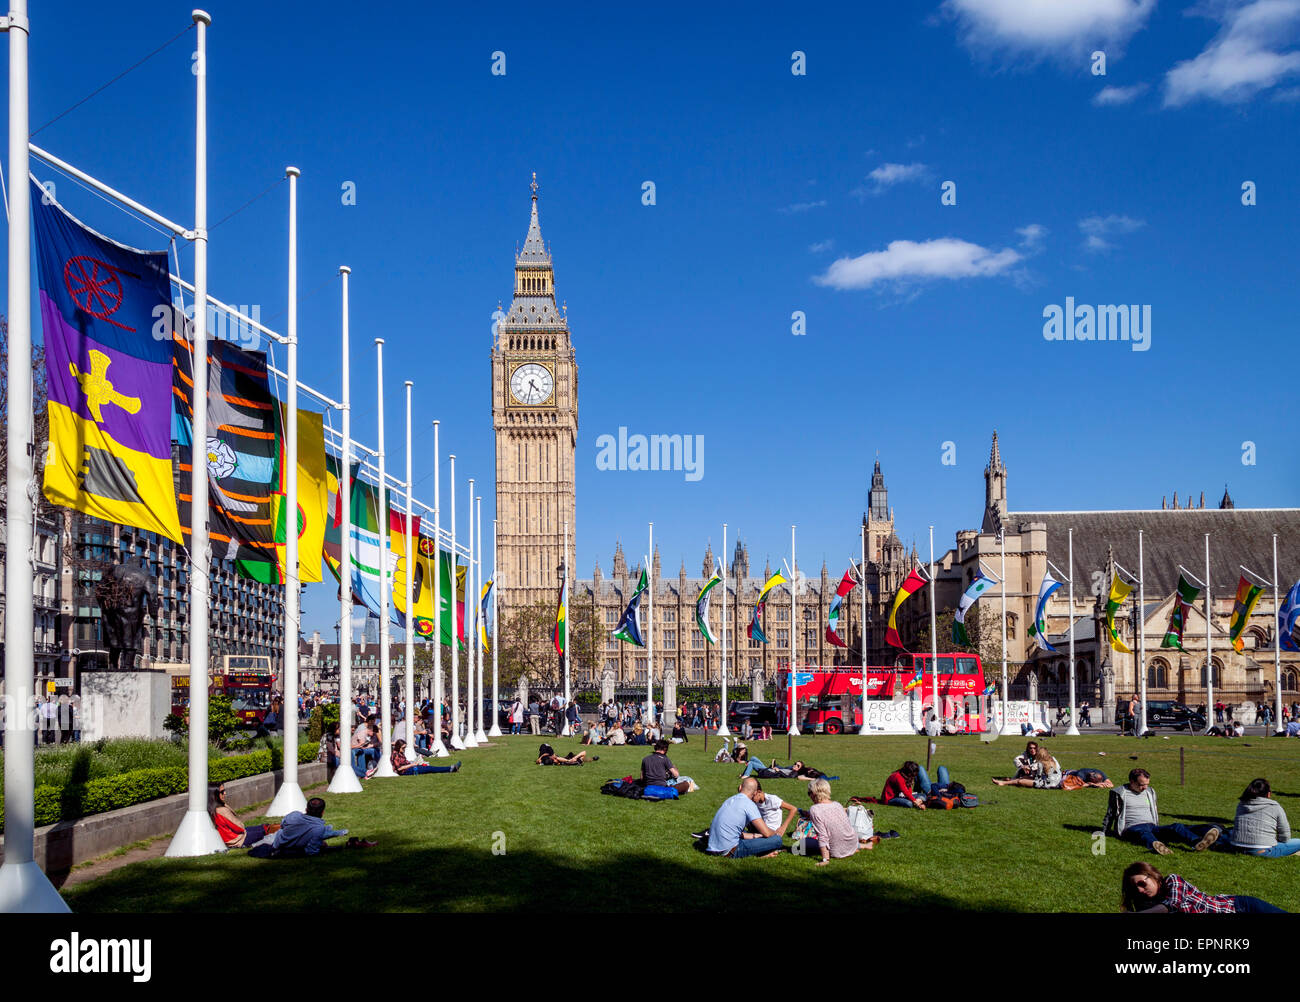 Tourists Sitting In The Sunshine In Parliament Square In Front of The Houses of Parliament , London, England Stock Photo